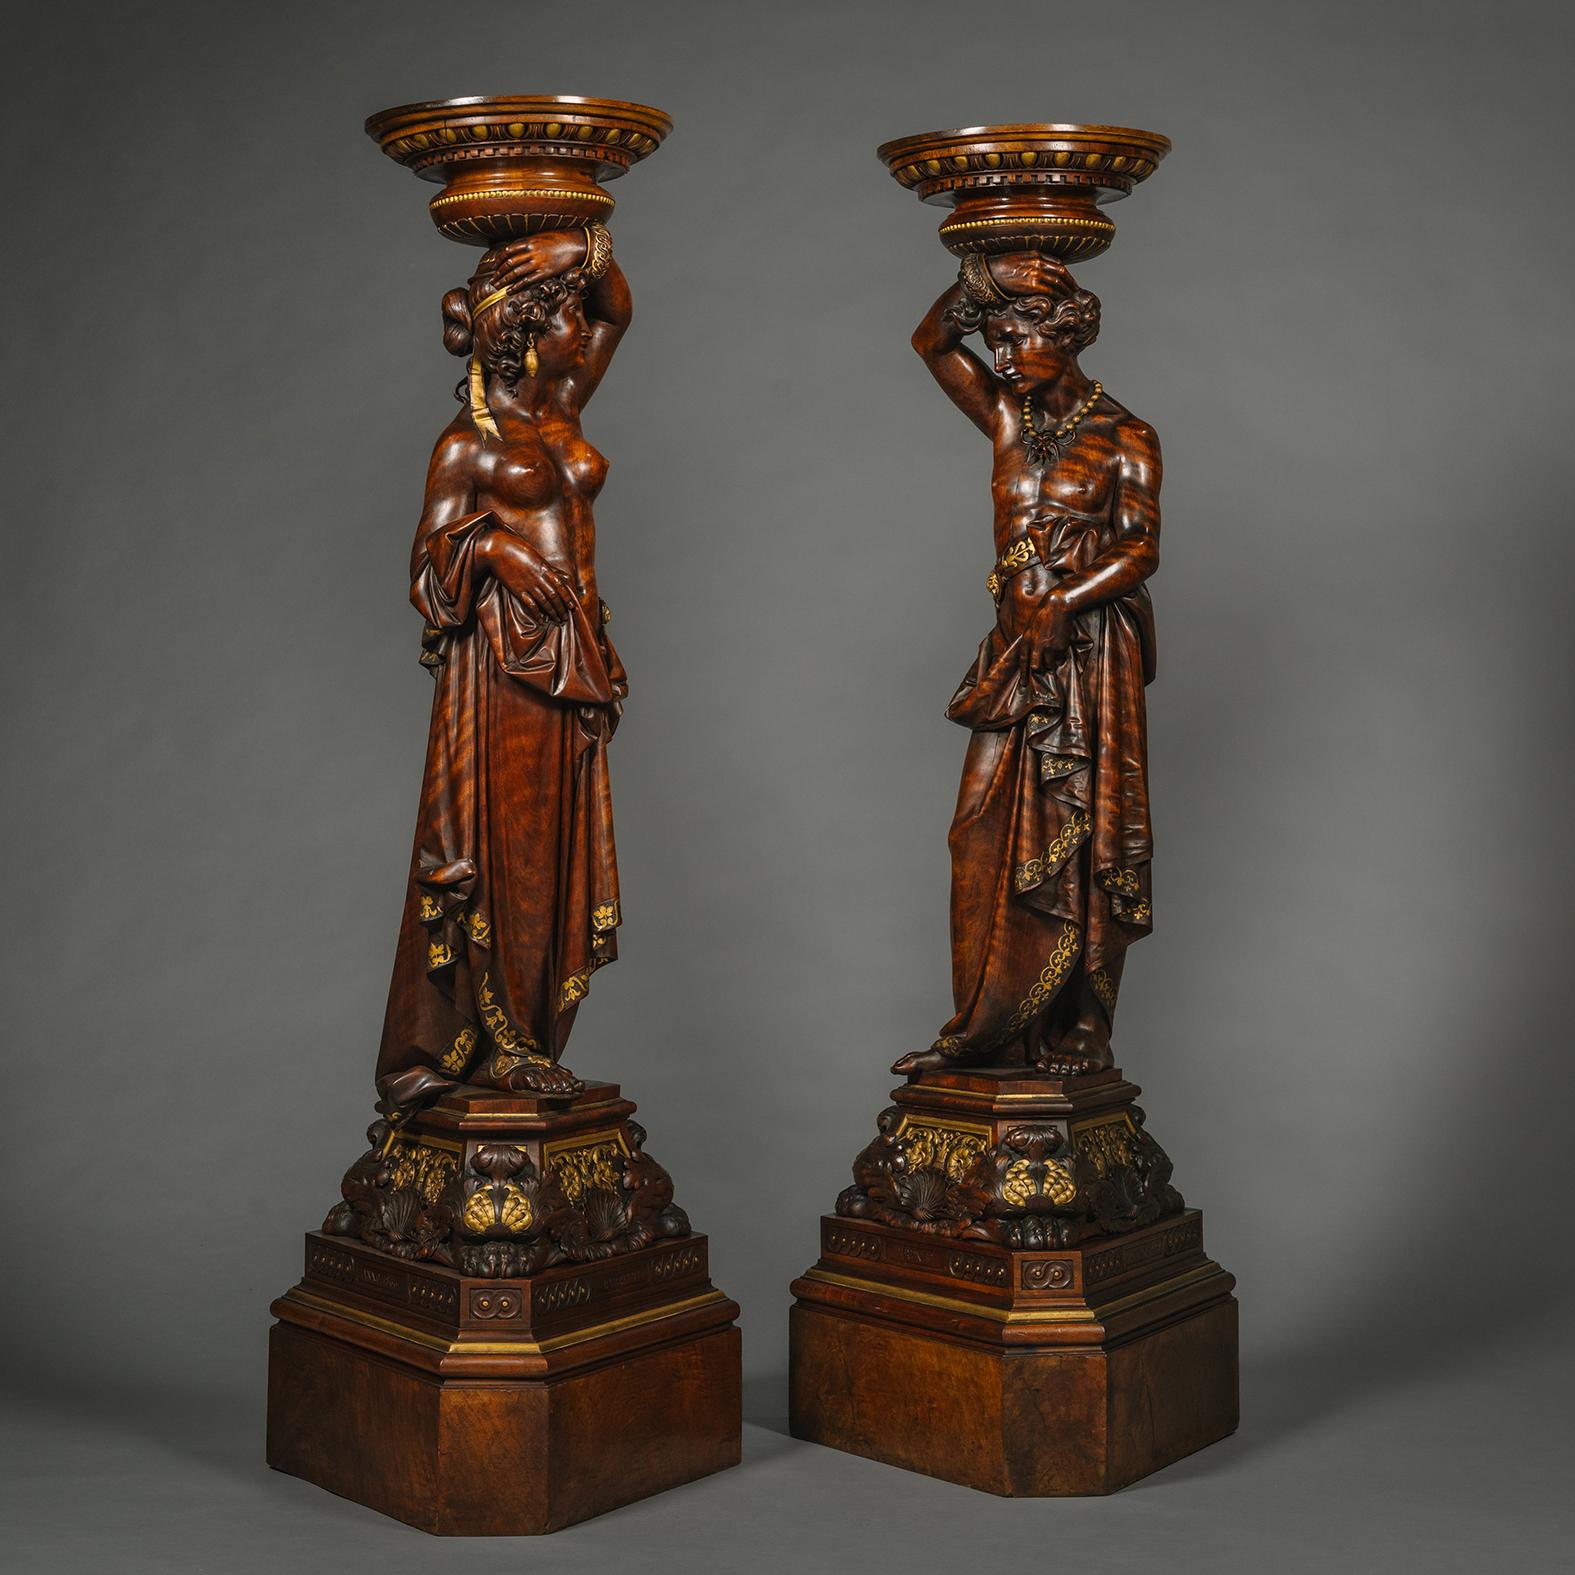 A Fine Pair of Italian Carved Walnut and Parcel Gilt Figural Torchères by Angiolo Barbetti, (1805-1873) Florence. 

Signed 'Barbetti', 'Anno 1866', 'Firenze'.  

Each torchère finely carved in the Renaissance revival style as classical Grecian